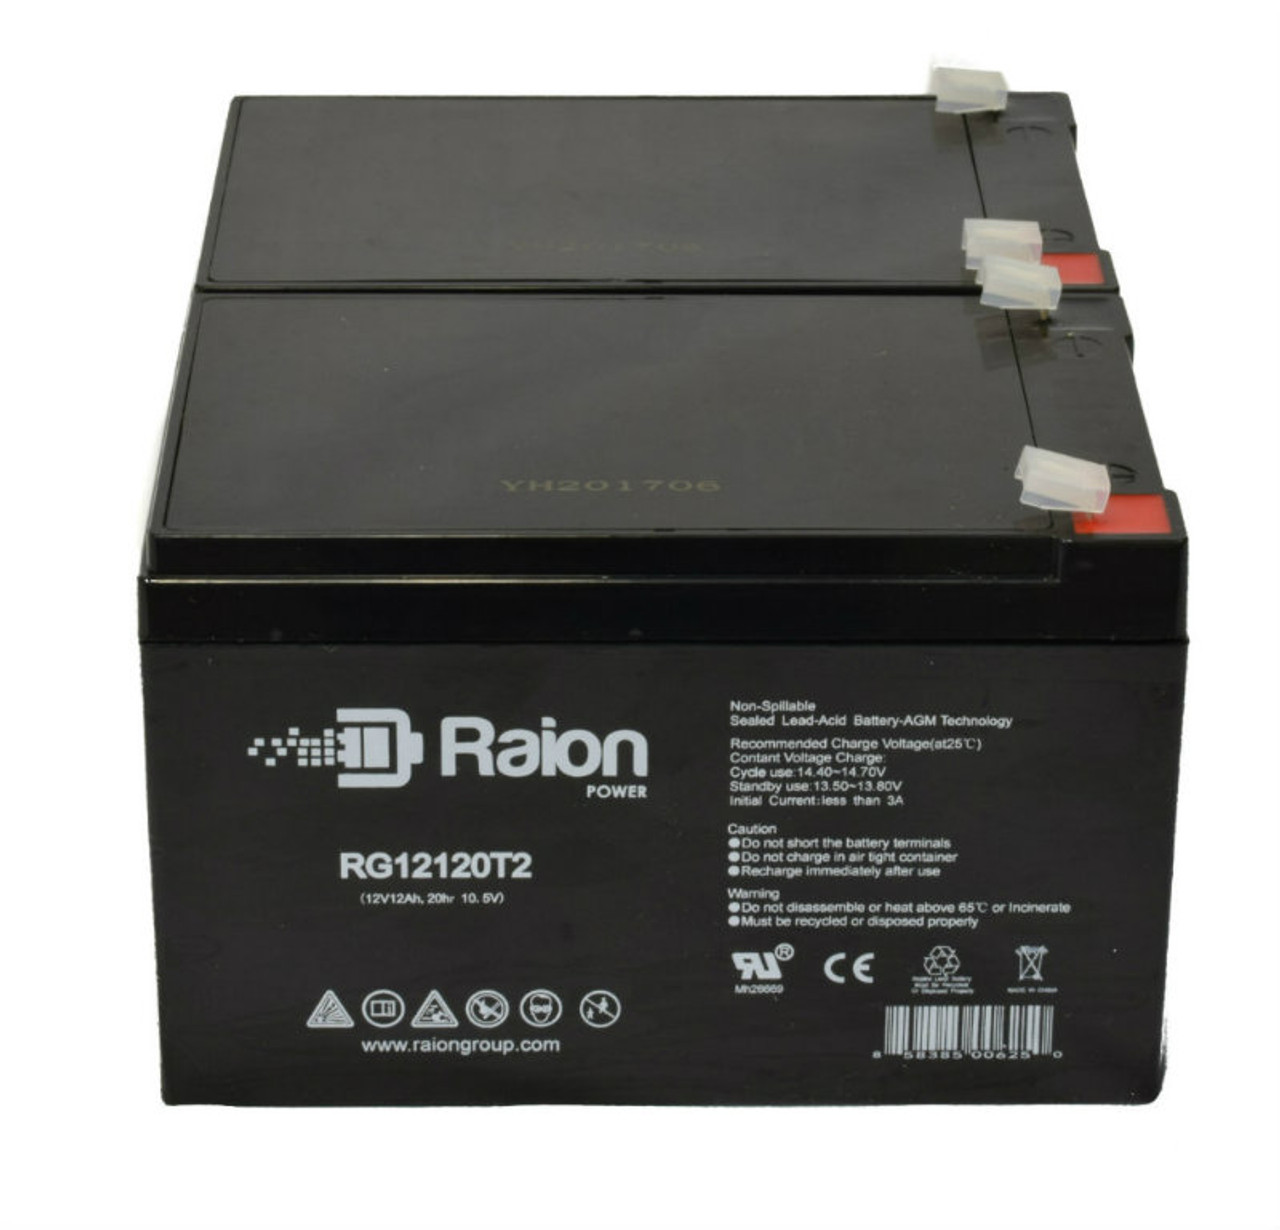 Raion Power RG12120T2 Replacement Battery Set for Electric Mobility Rascal EM115 Mobility Scooter - 2 Pack